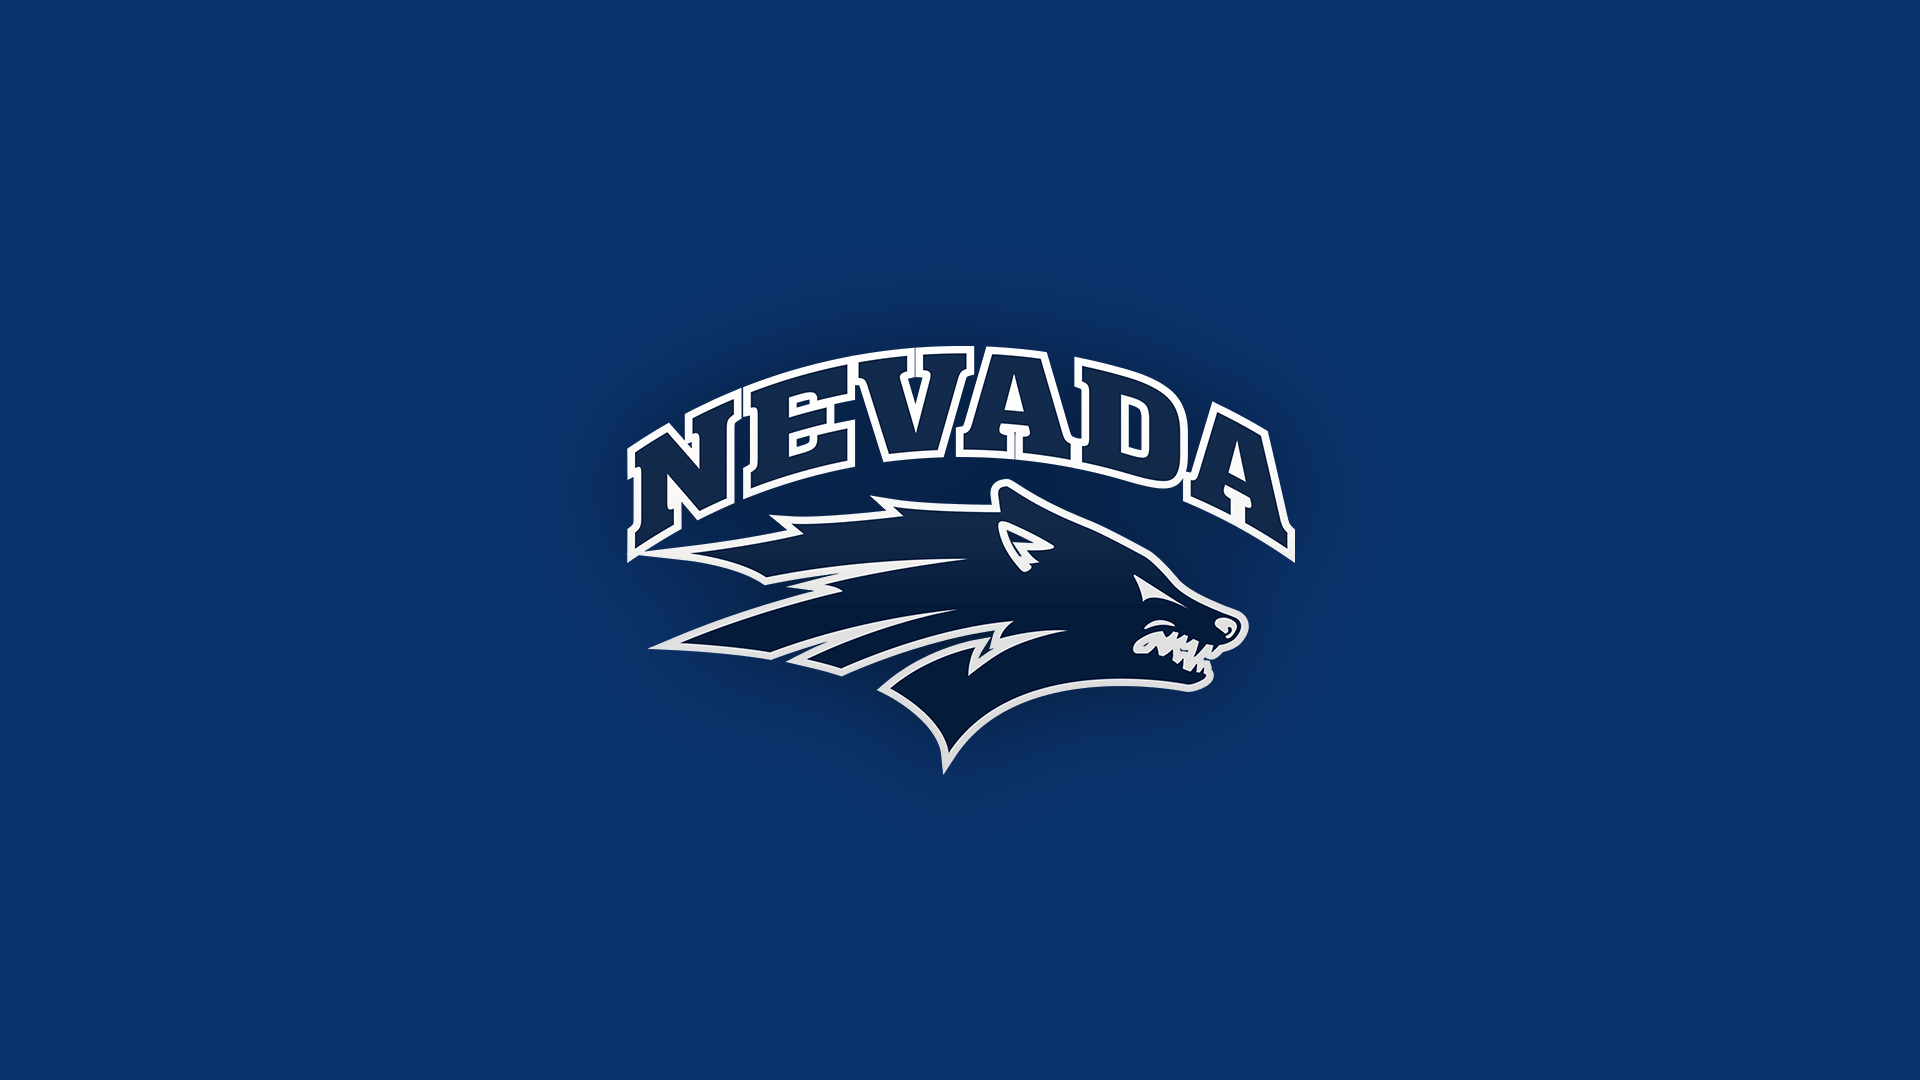 Nevada Wolf Pack Football - NCAAF - Square Bettor